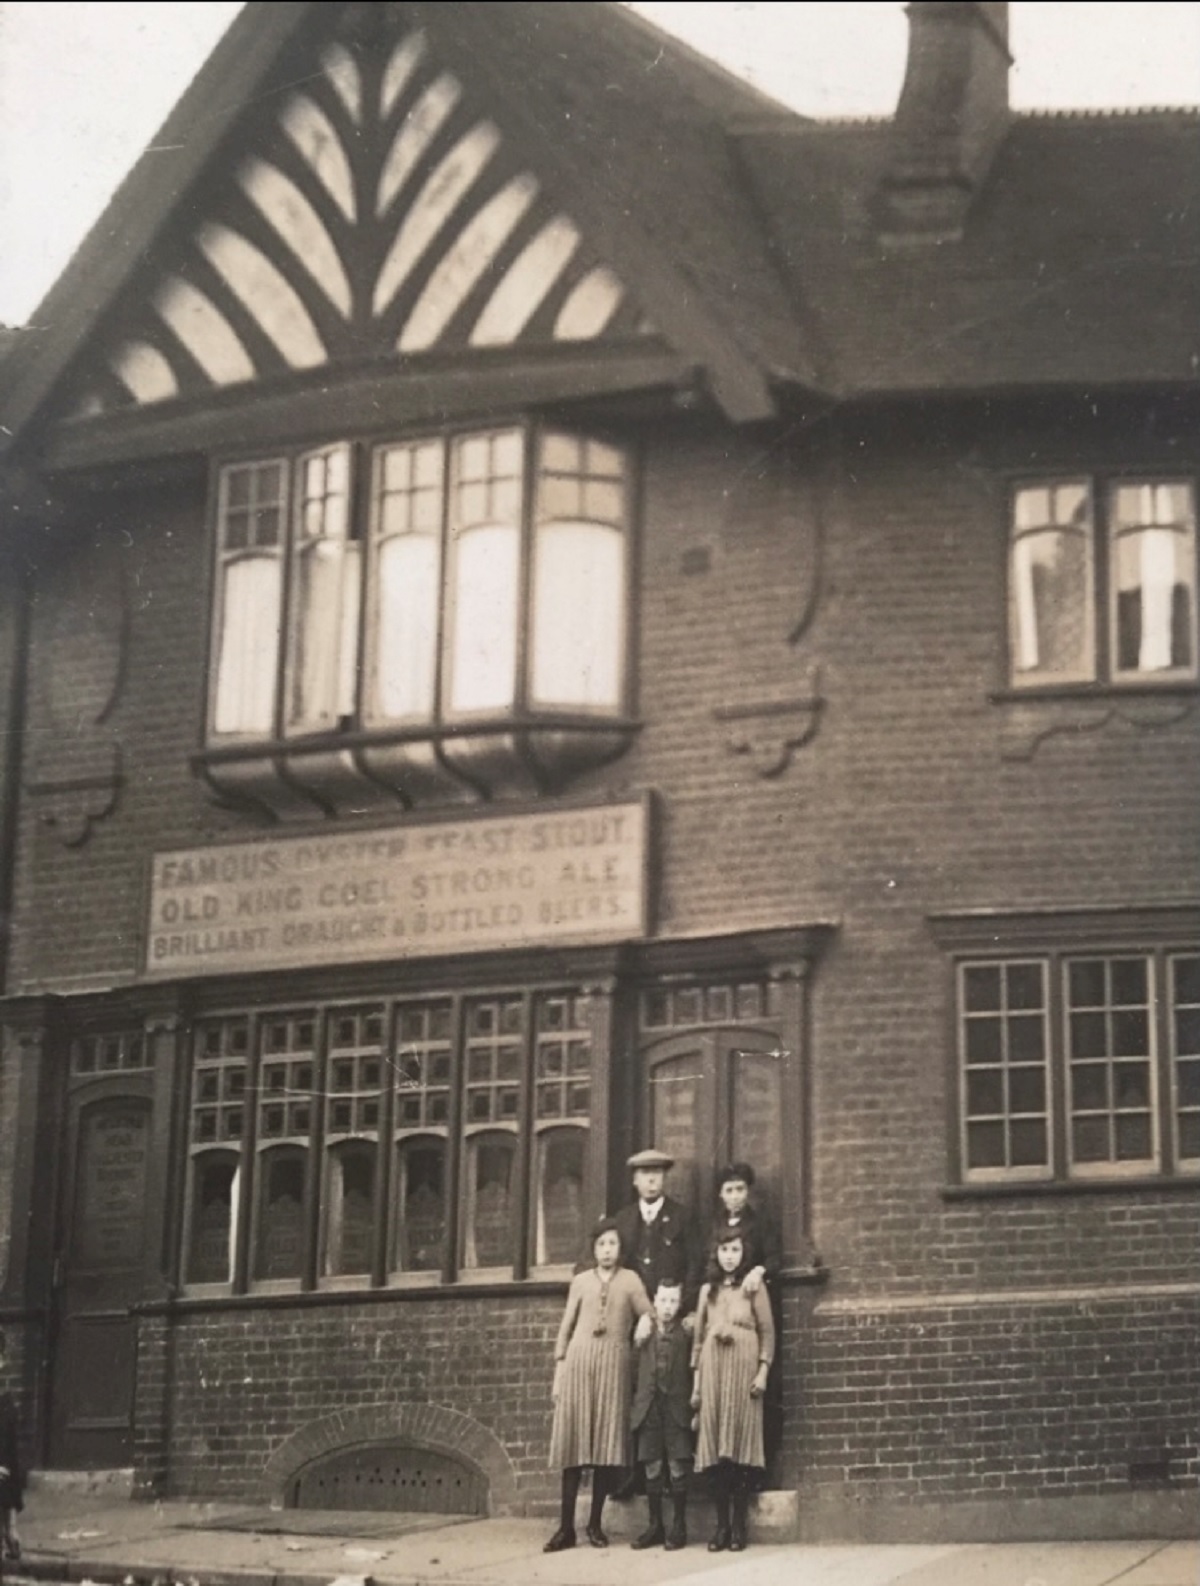 Great minds drink alike - The Nelsons Head, in West Stockwell Street. The landlord is Marys great-grandfather, William Wade, and he is pictured with wife Rosina and children Hilda (Marys grandmother), William and Dolly